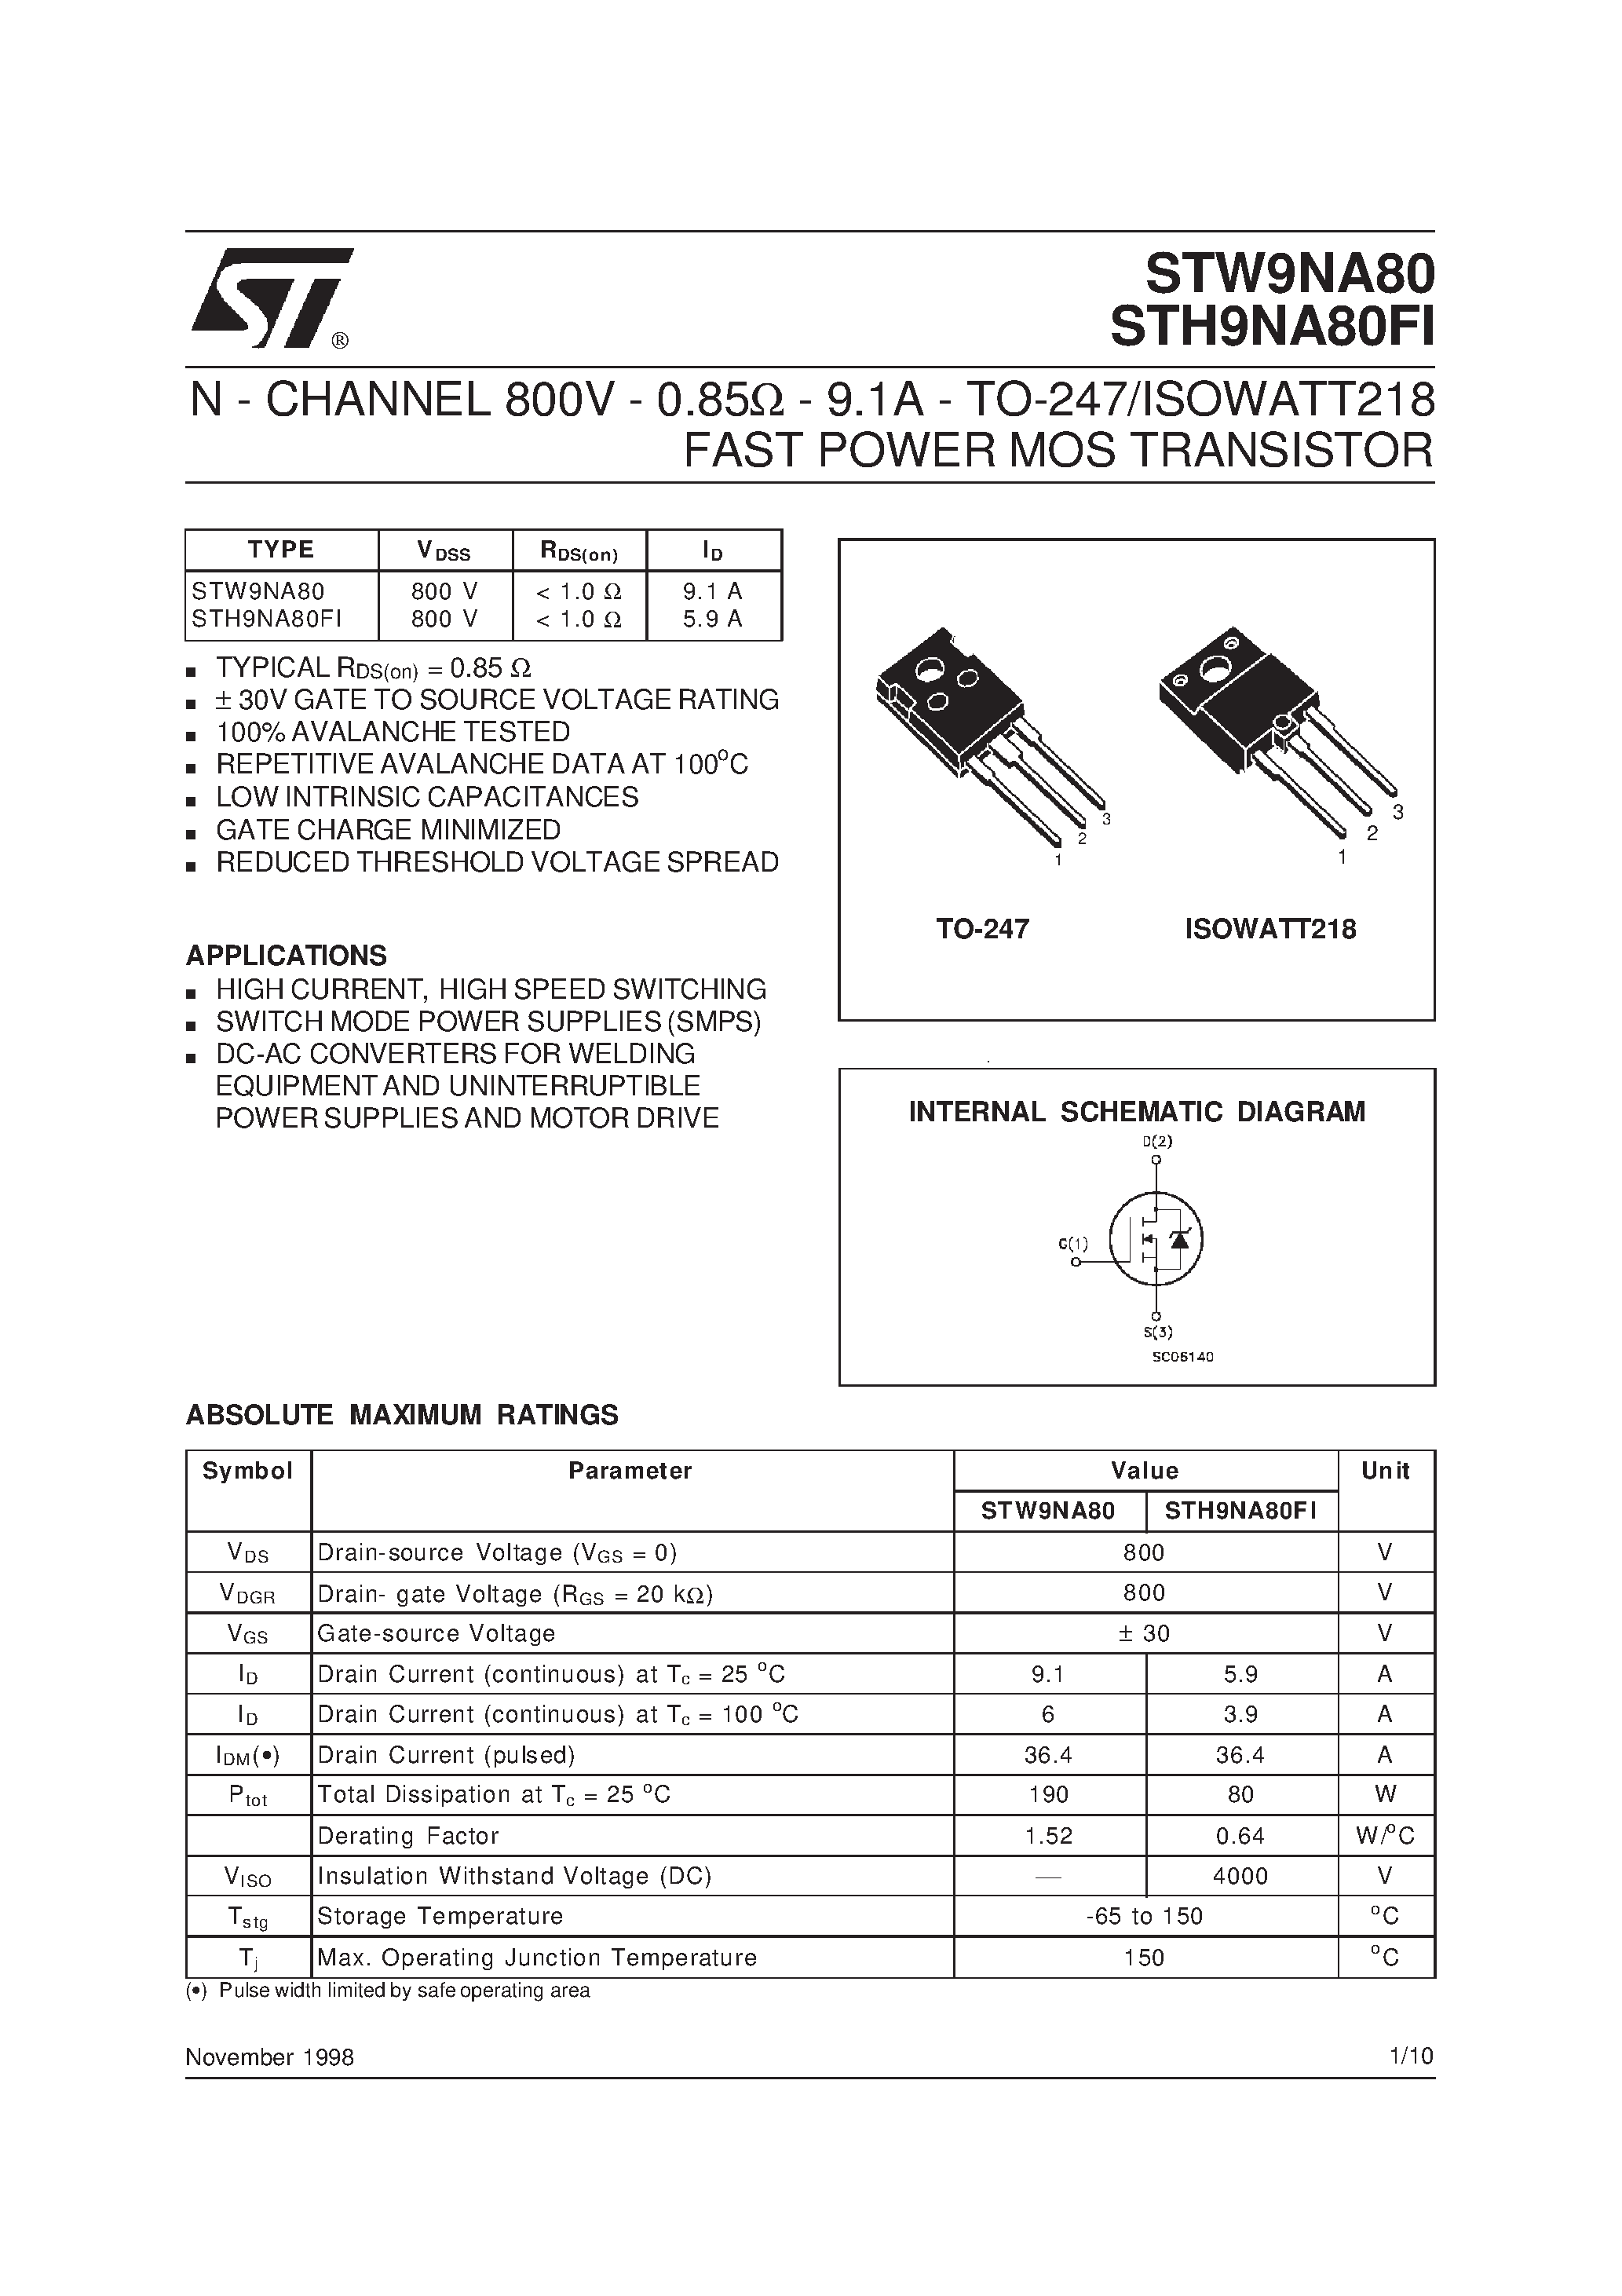 Datasheet STW9NA80 - N - CHANNEL 800V - 0.85ohm - 9.1A - TO-247/ISOWATT218 FAST POWER MOS TRANSISTOR page 1